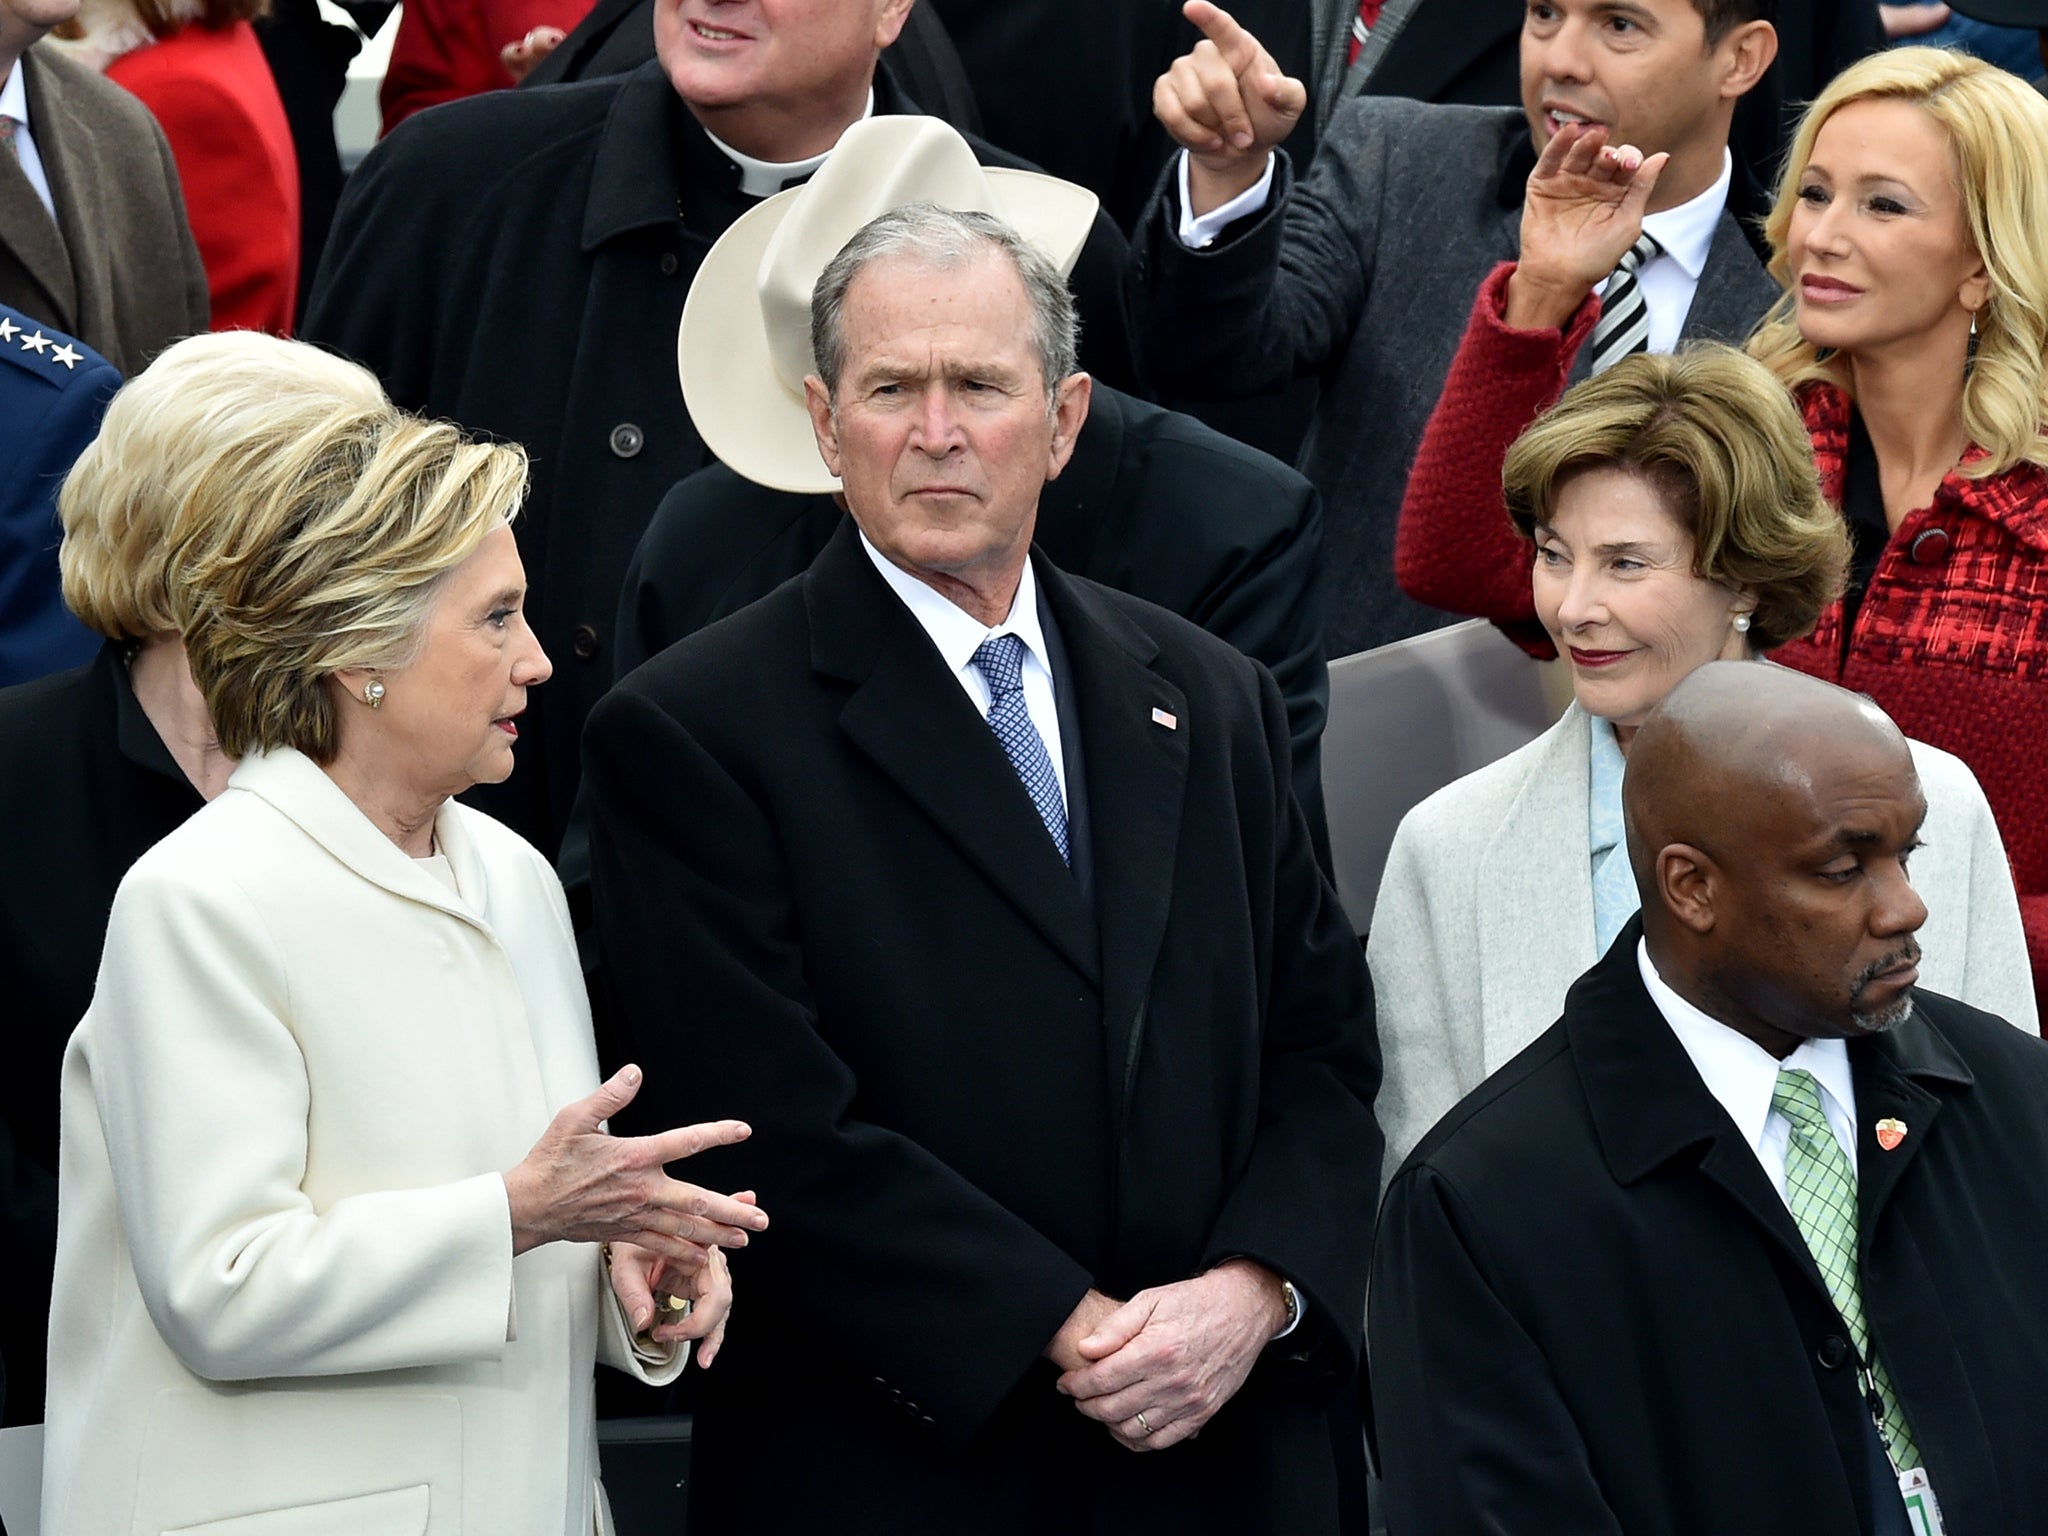 George W Bush with Hillary Clinton and his wife Laura (L-R) at the inauguration in January